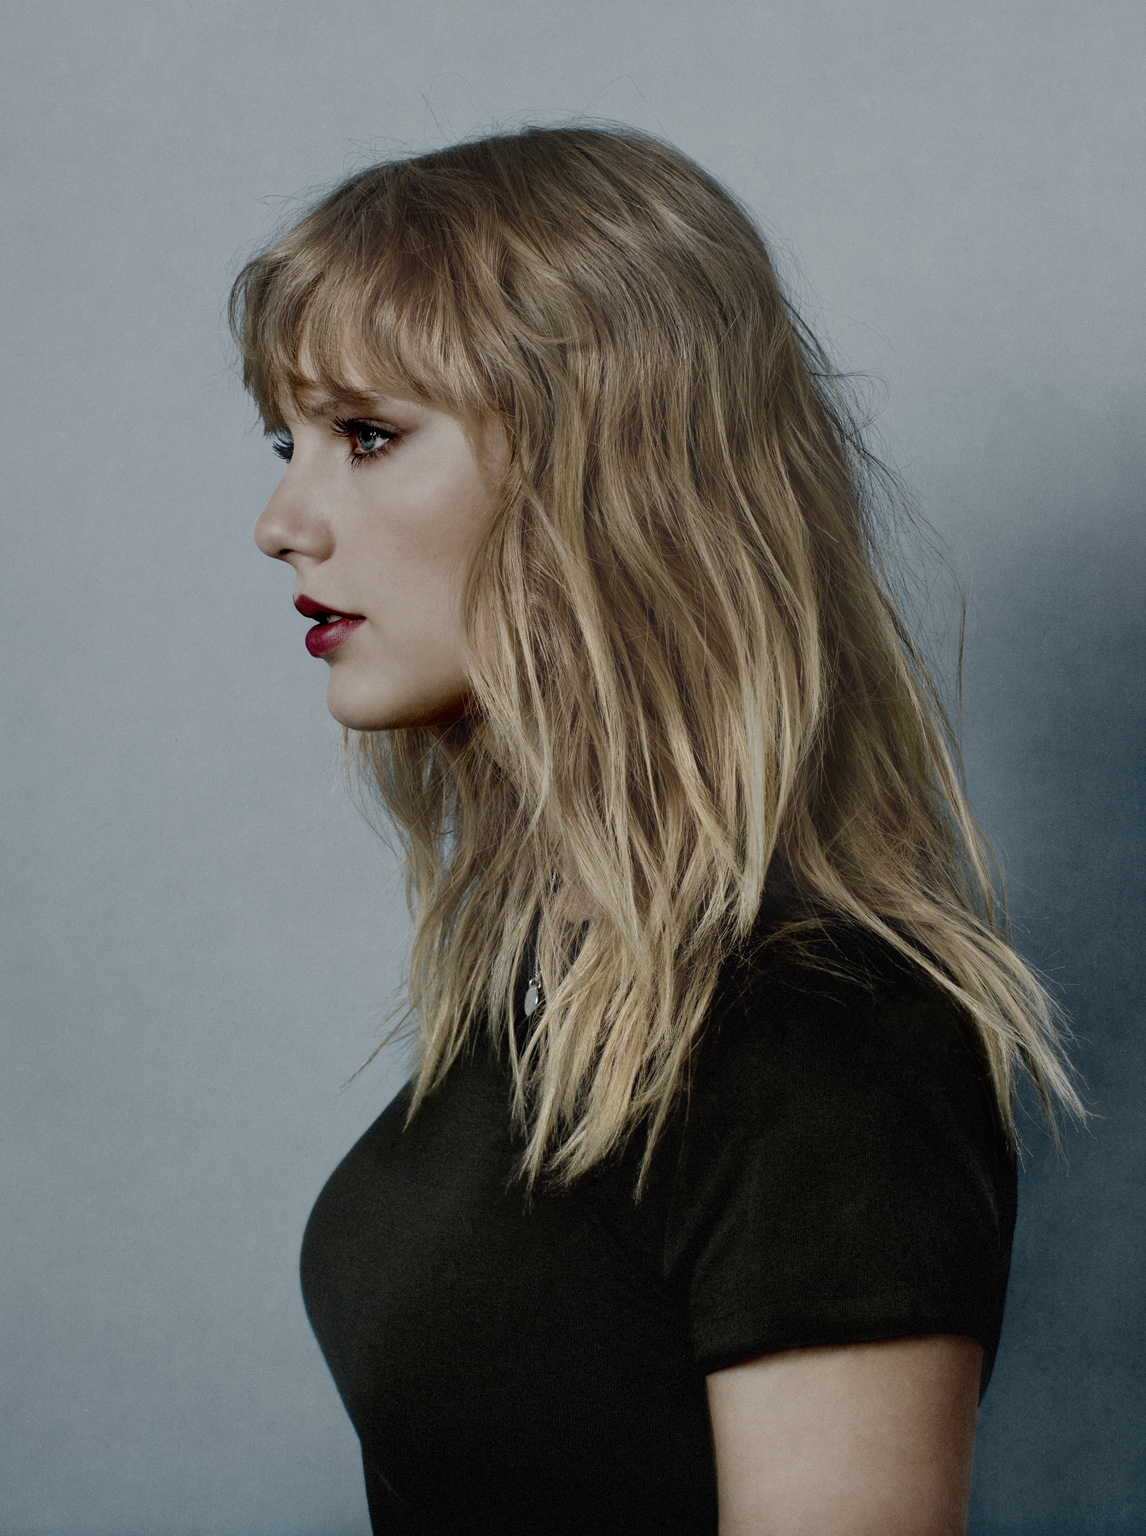 Taylor Swift, photographed Nov. 2017. (Billy &amp; Hells for TIME)